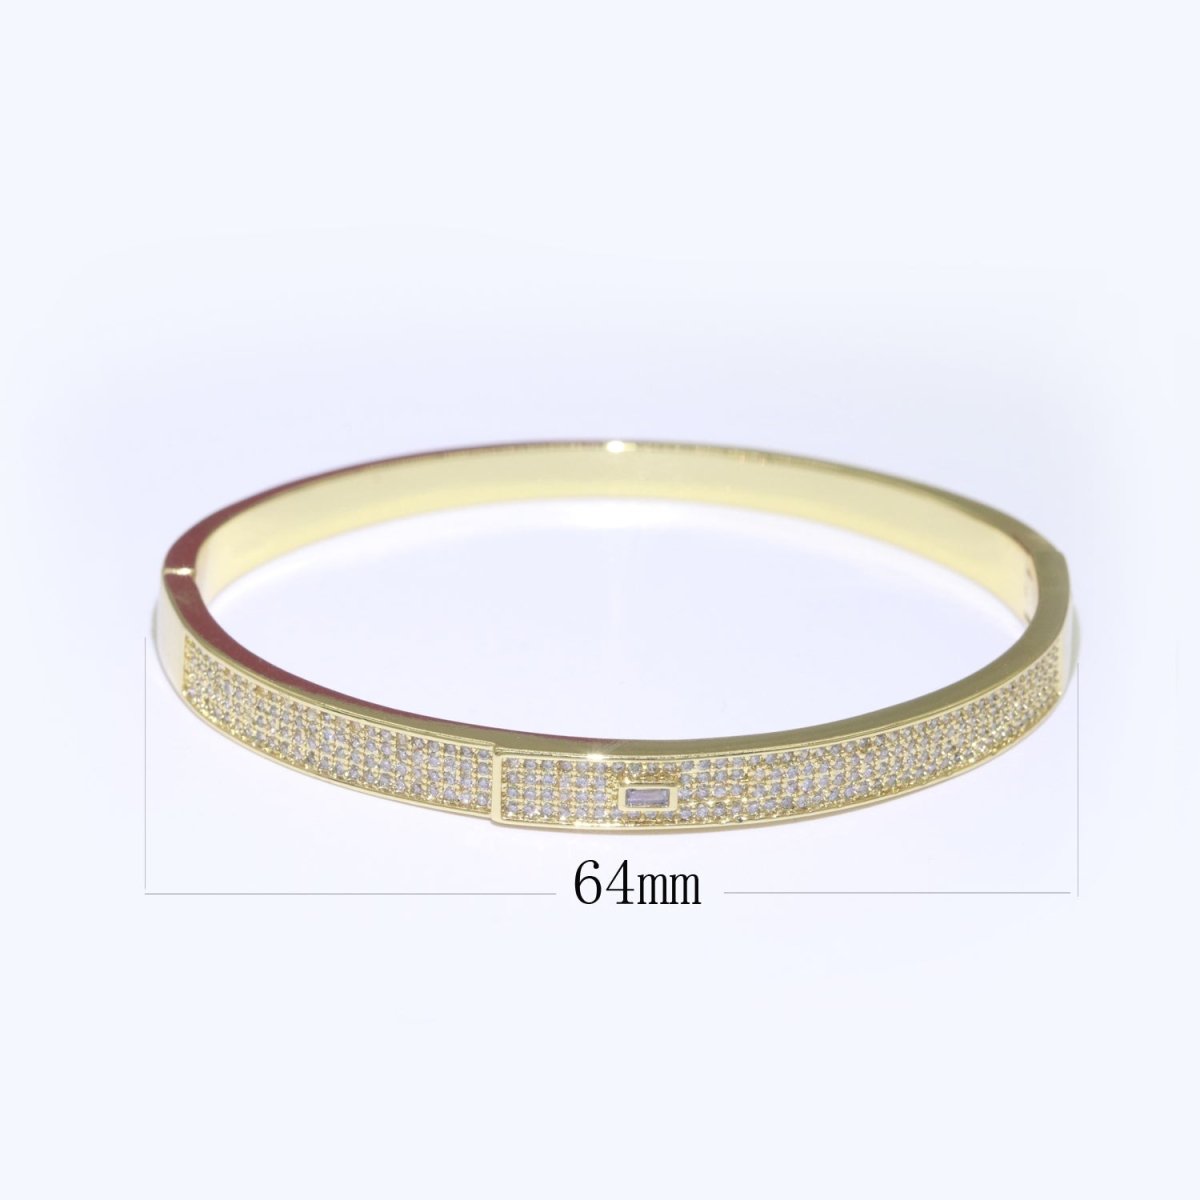 Micro Pave Gold Bracelet 14K Gold Filled Stackable Jewelry Gold Bangle Bracelet | WA-071 Clearance Pricing - DLUXCA